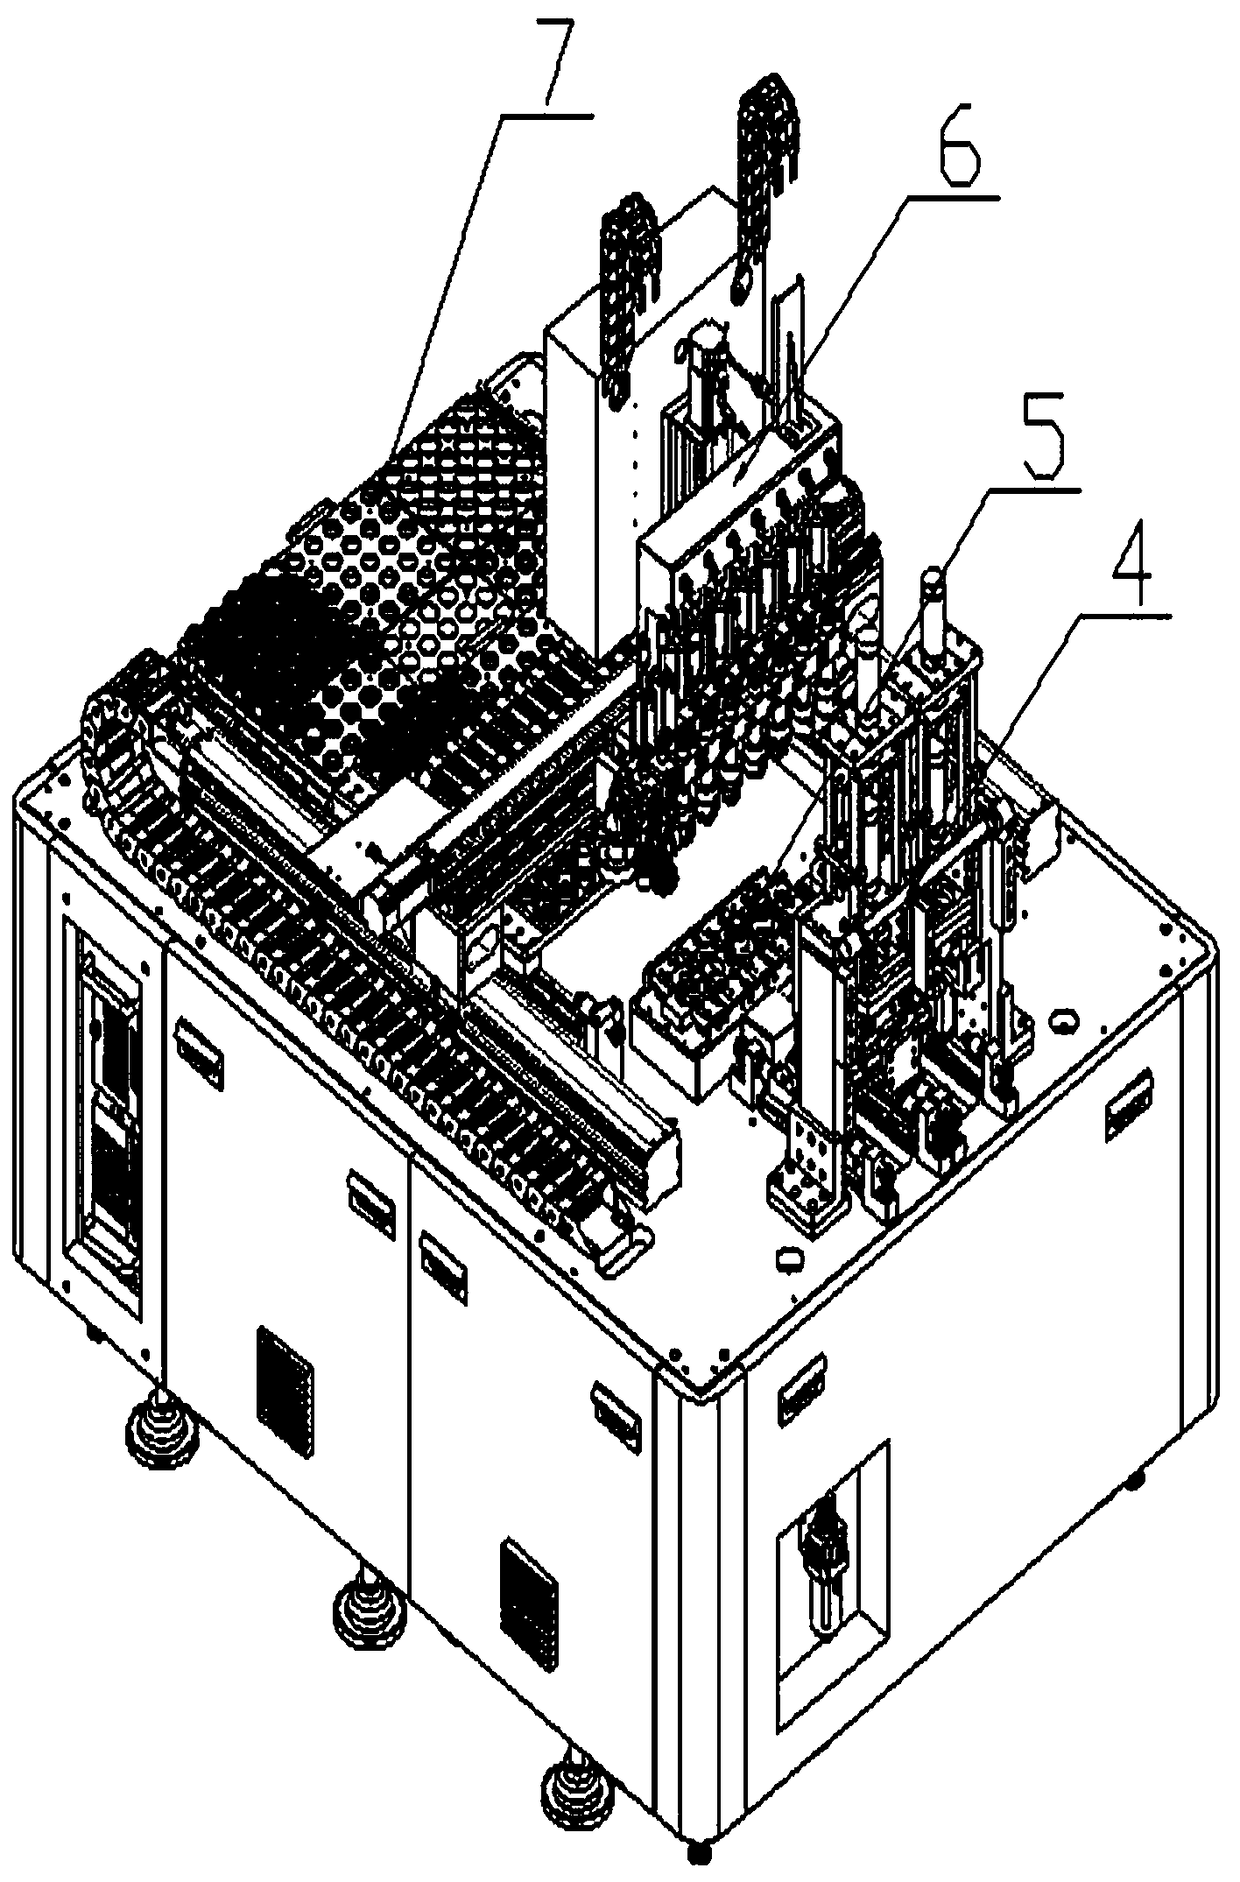 Assembling equipment used for large-diameter projection lens